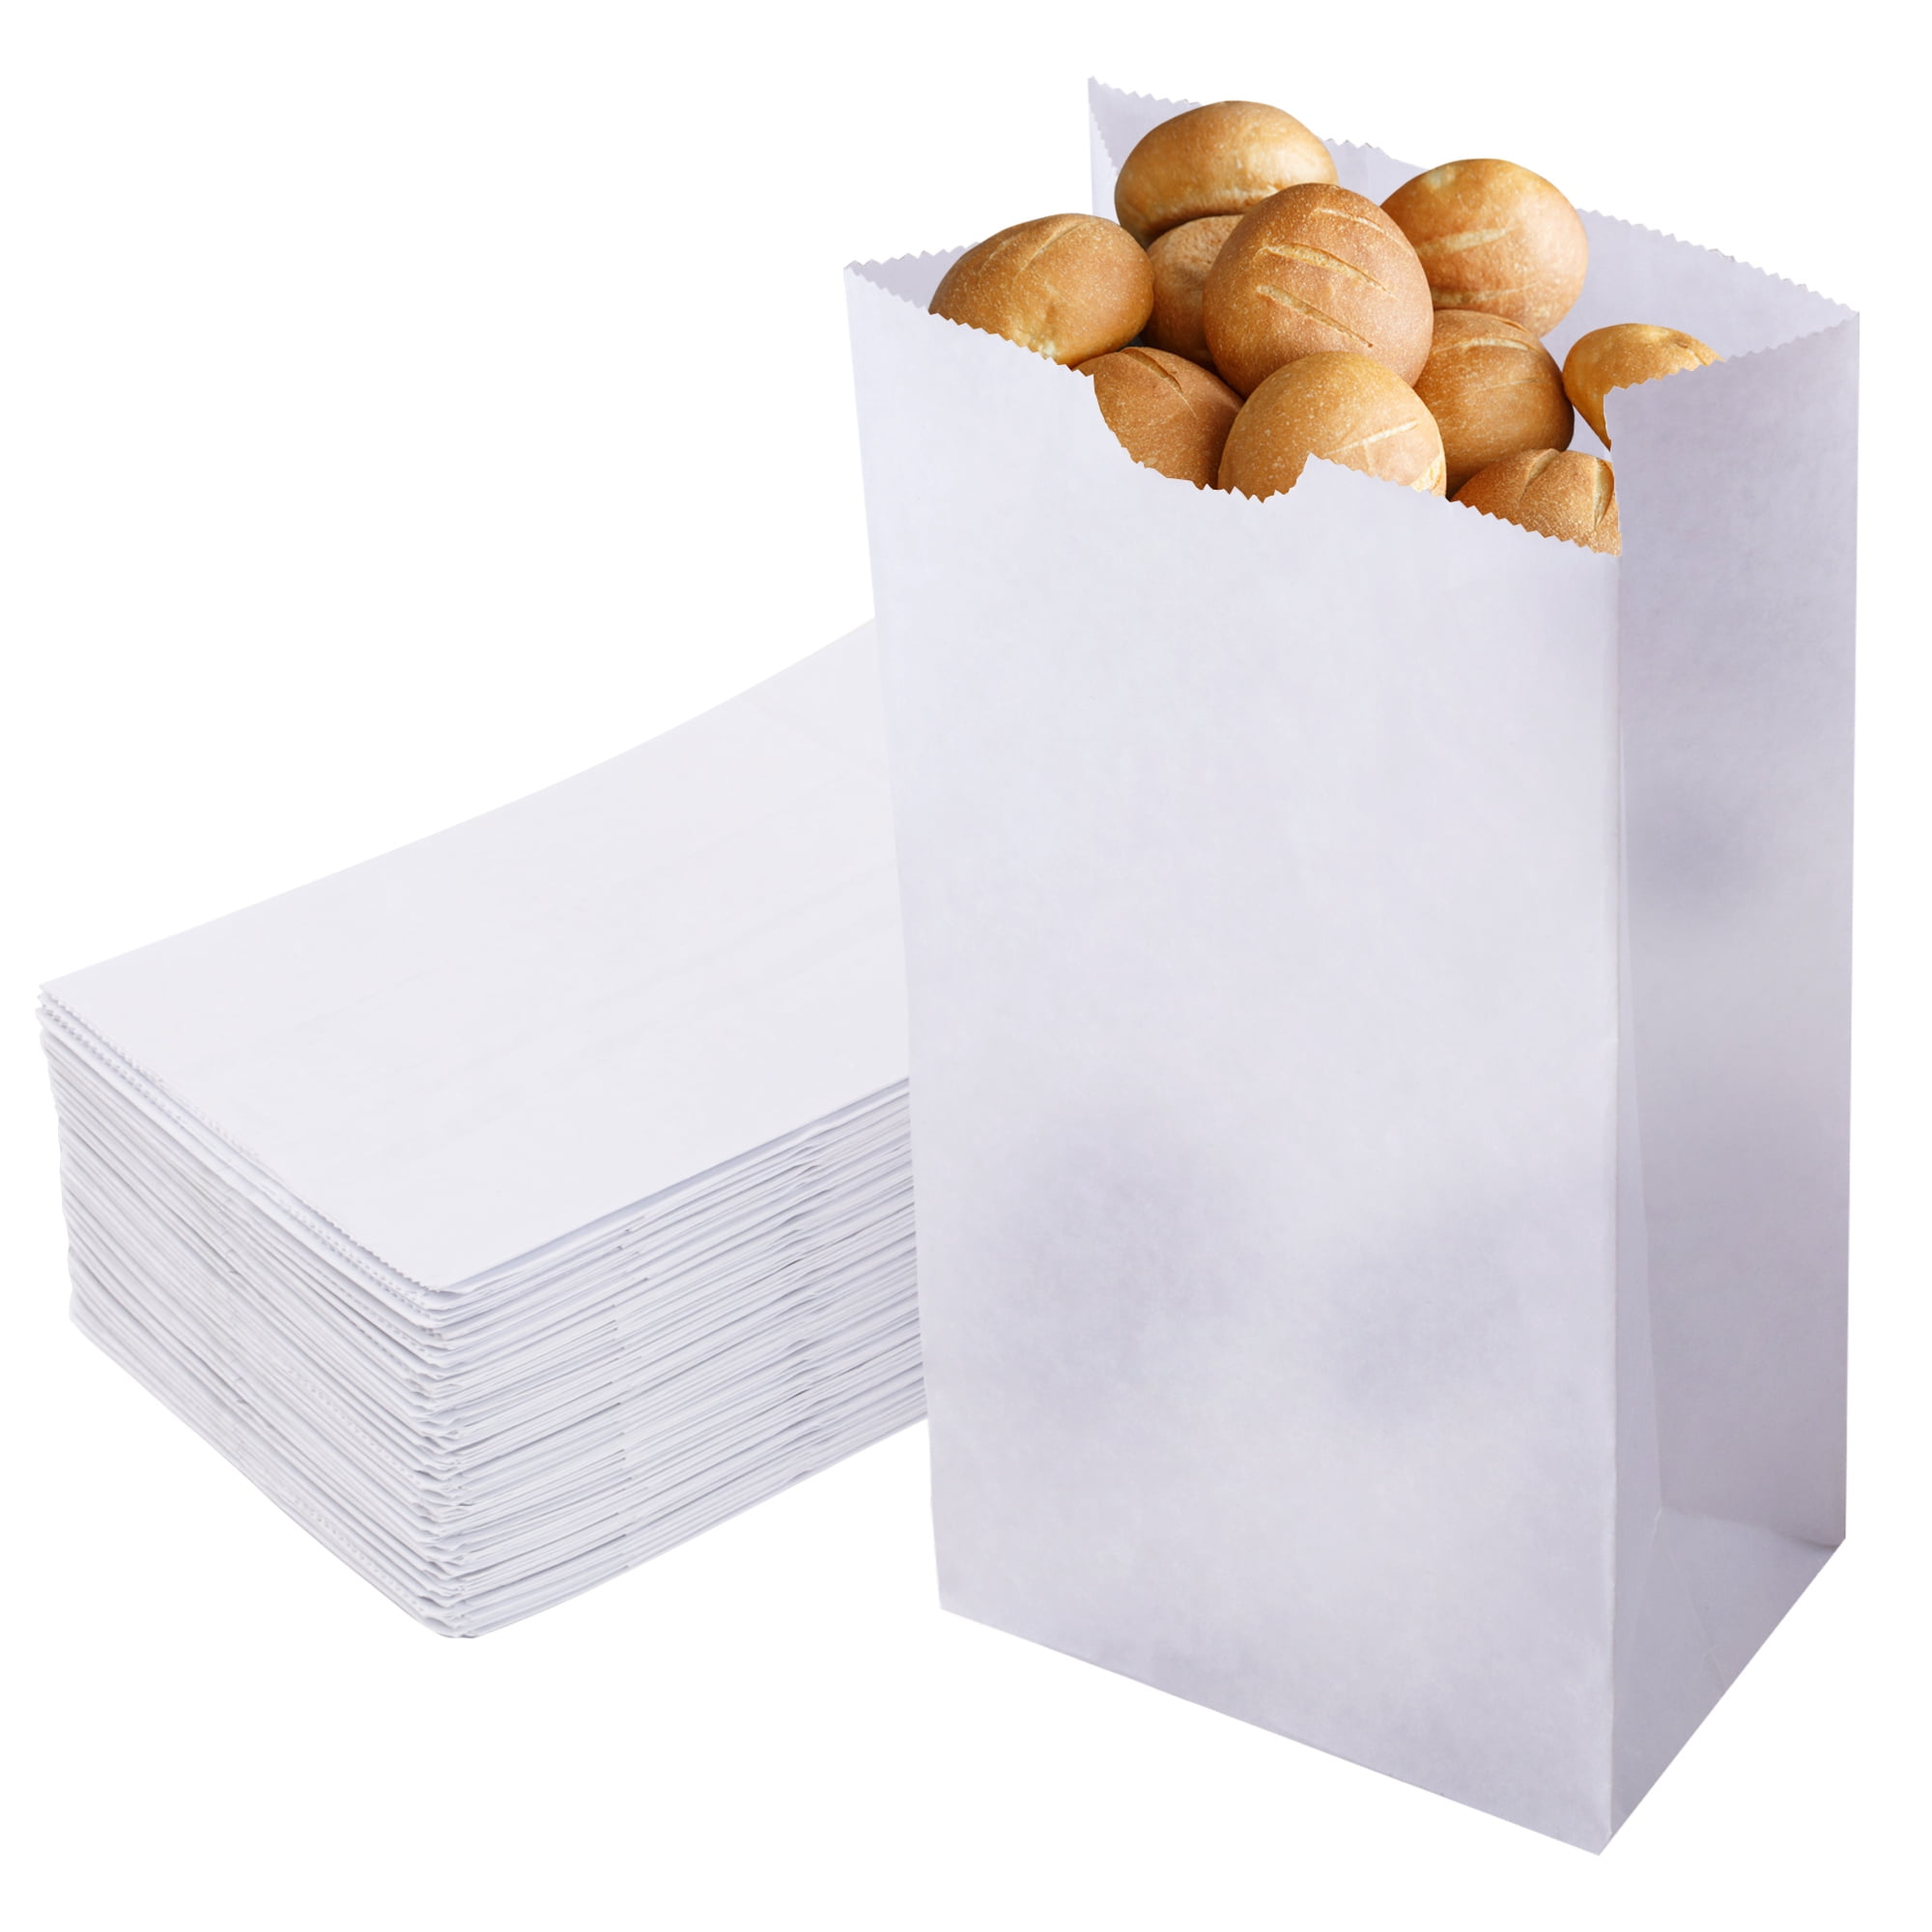 125 Pack] 4 Lb Waxed Bakery Bags - White Paper Lunch Bags, Biodegradable  Grease Resistant Paper Bag for To Go Snacks Treat, Cookie, Sandwich, Candy,  Popcorn, Bread, Wedding, Party Flavor, Restaurant 